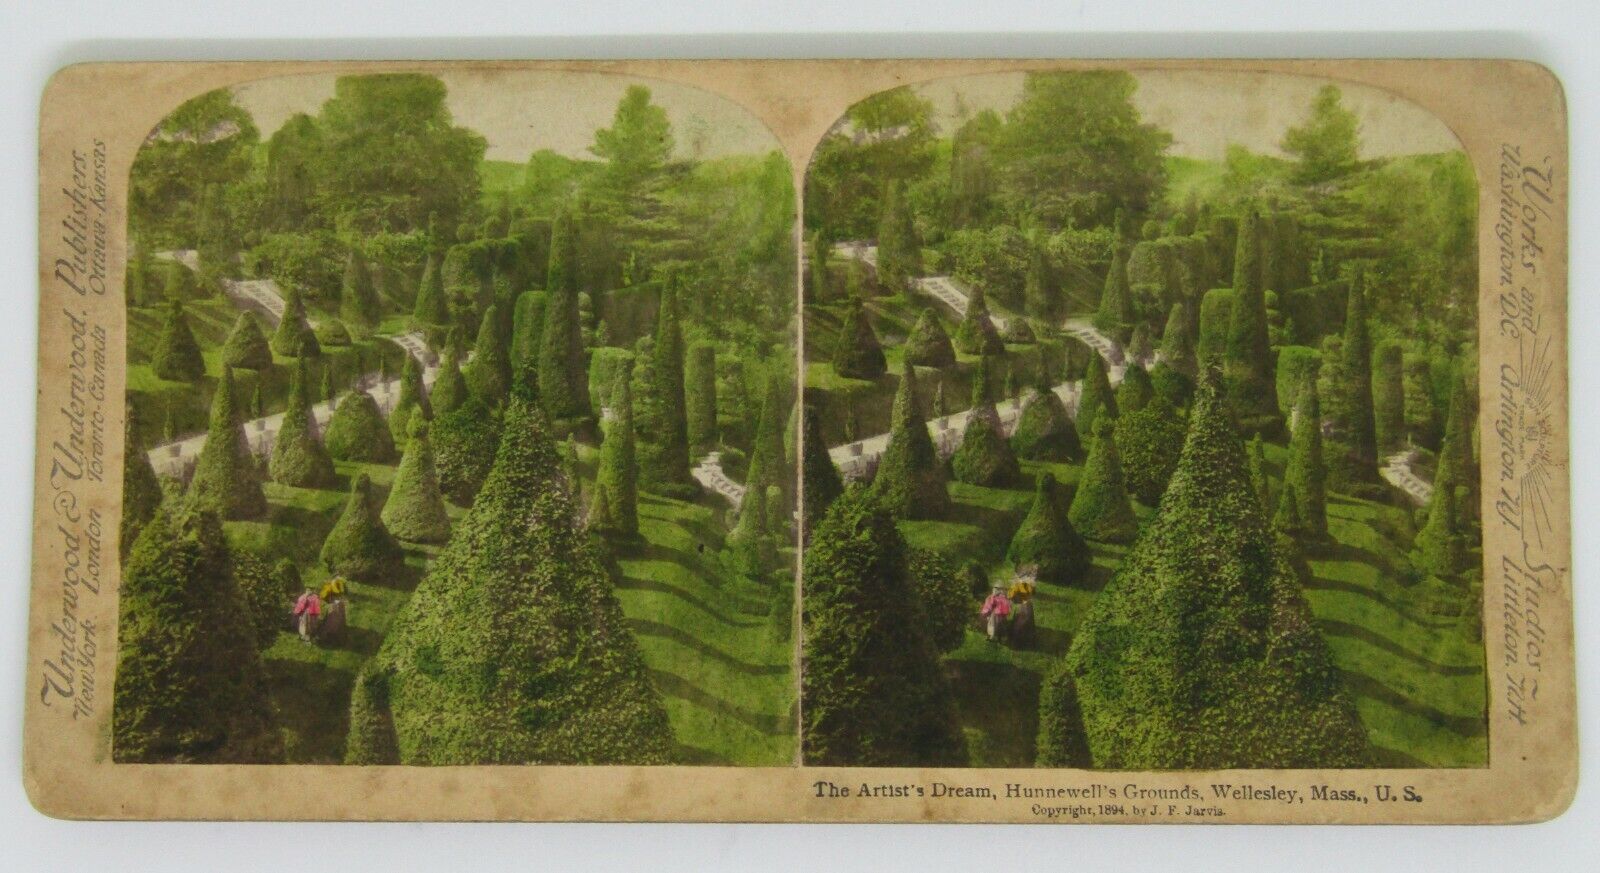 Hunnewell's Grounds Wellesley Massachusetts Vintage 1894 Stereoview Photo Card